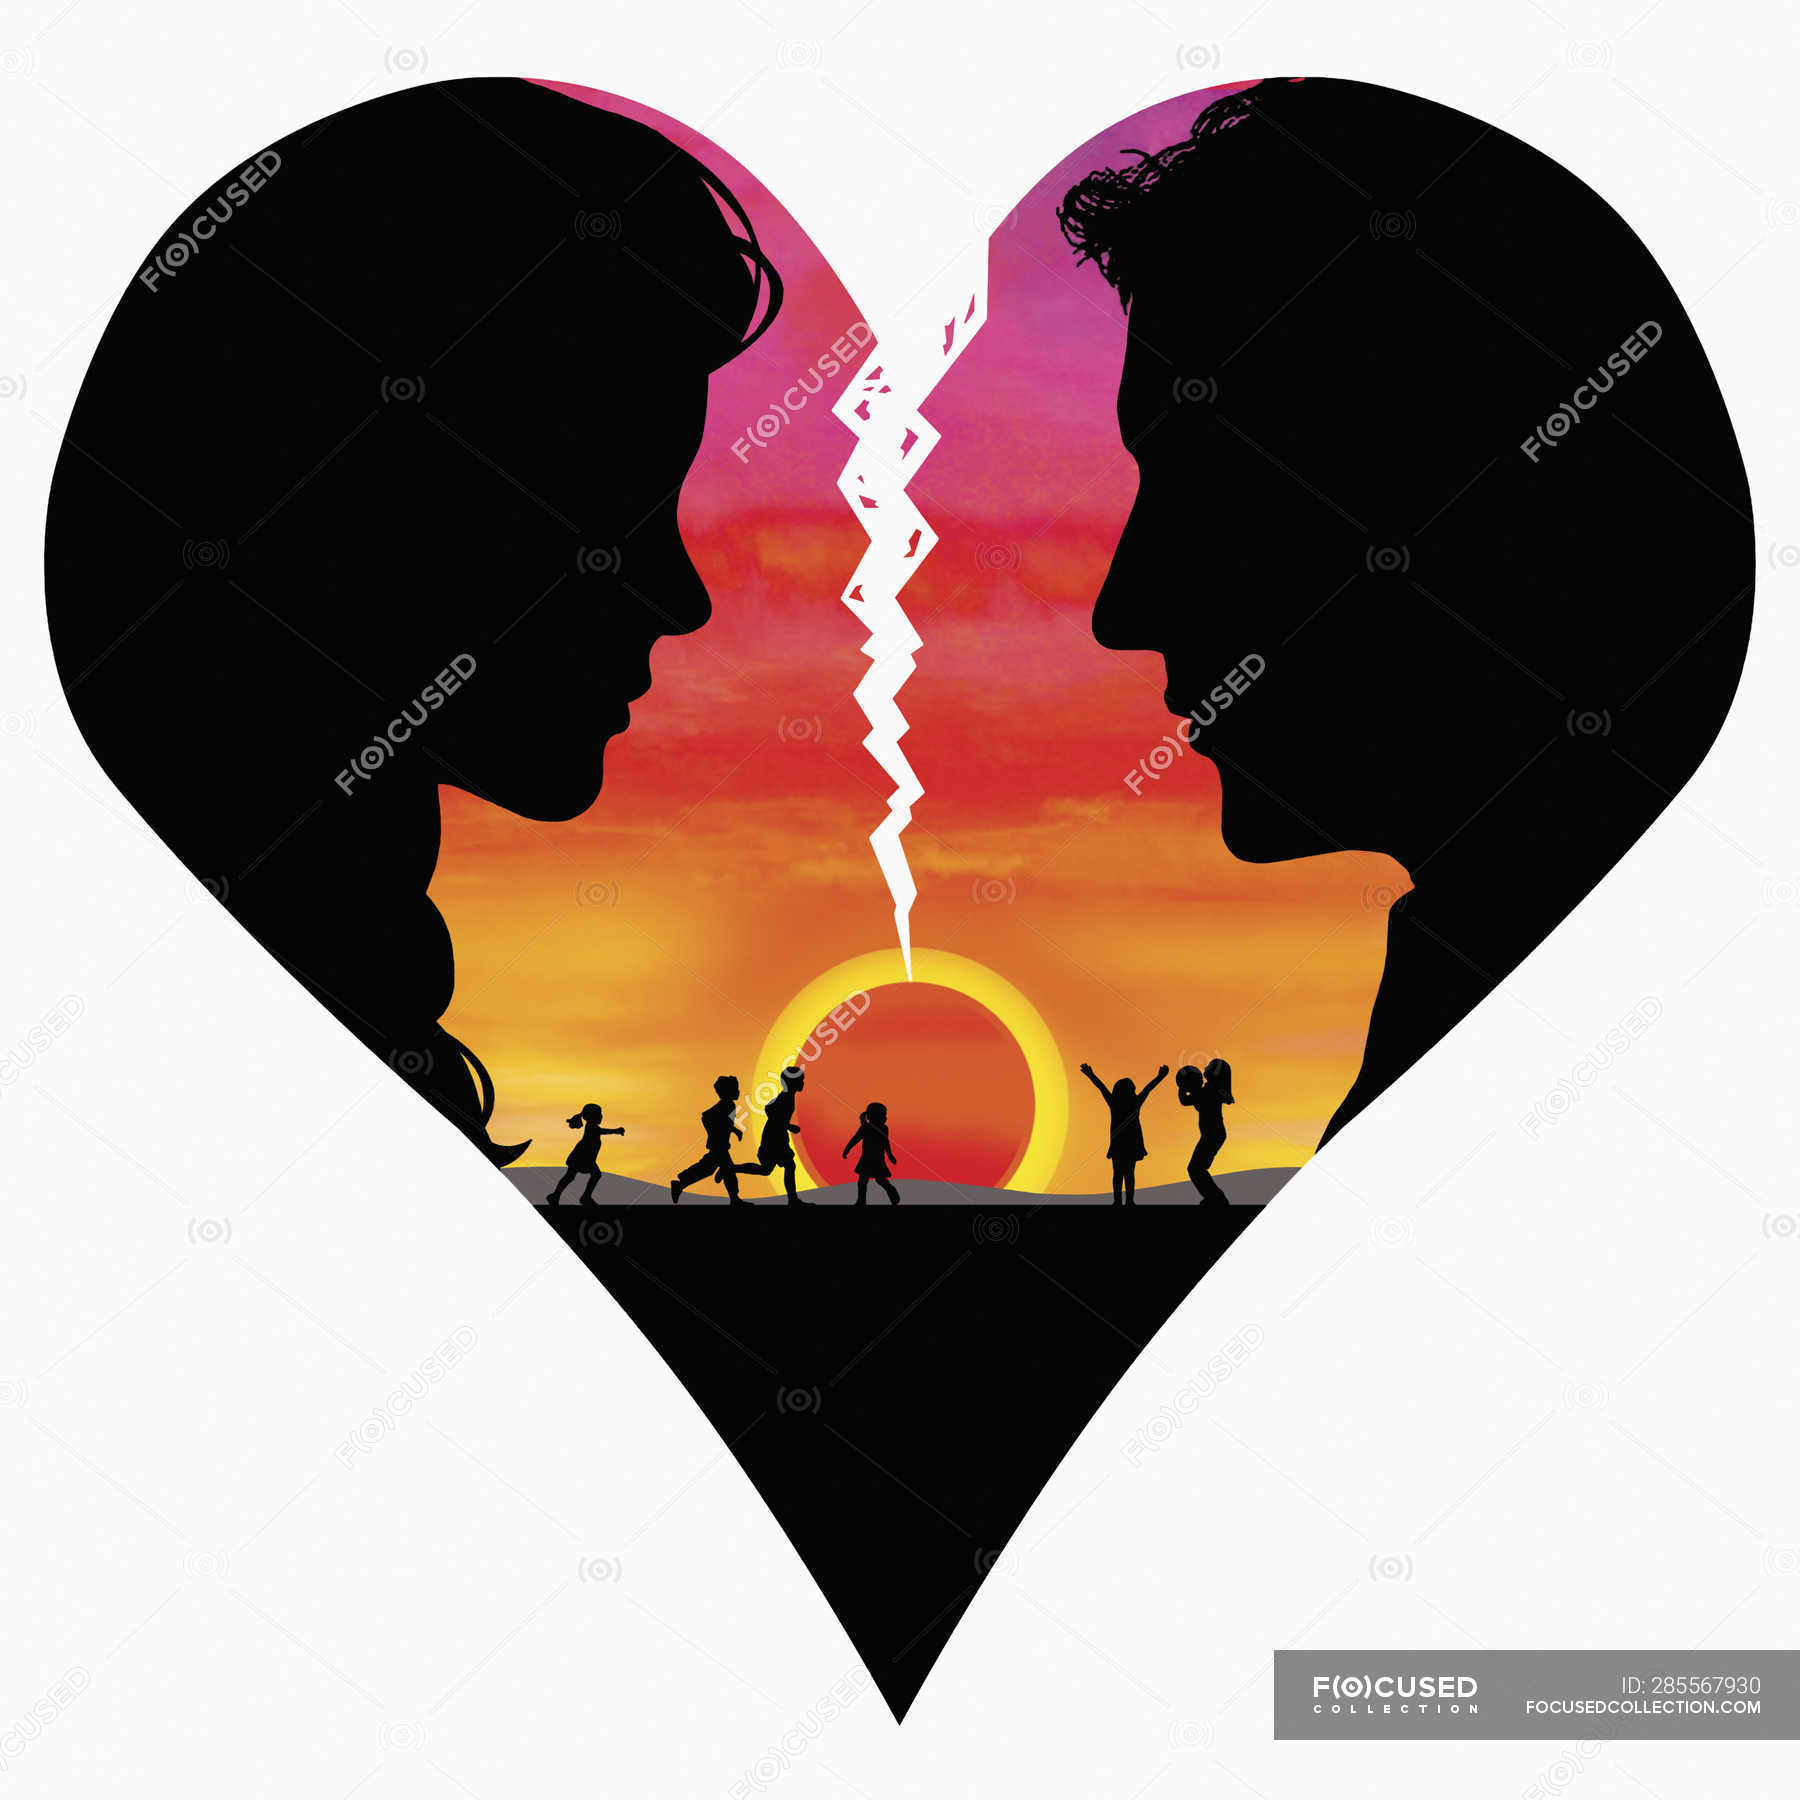 Couple inside breaking heart with happy family at sunset in background —  girls, Face To Face - Stock Photo | #285567930